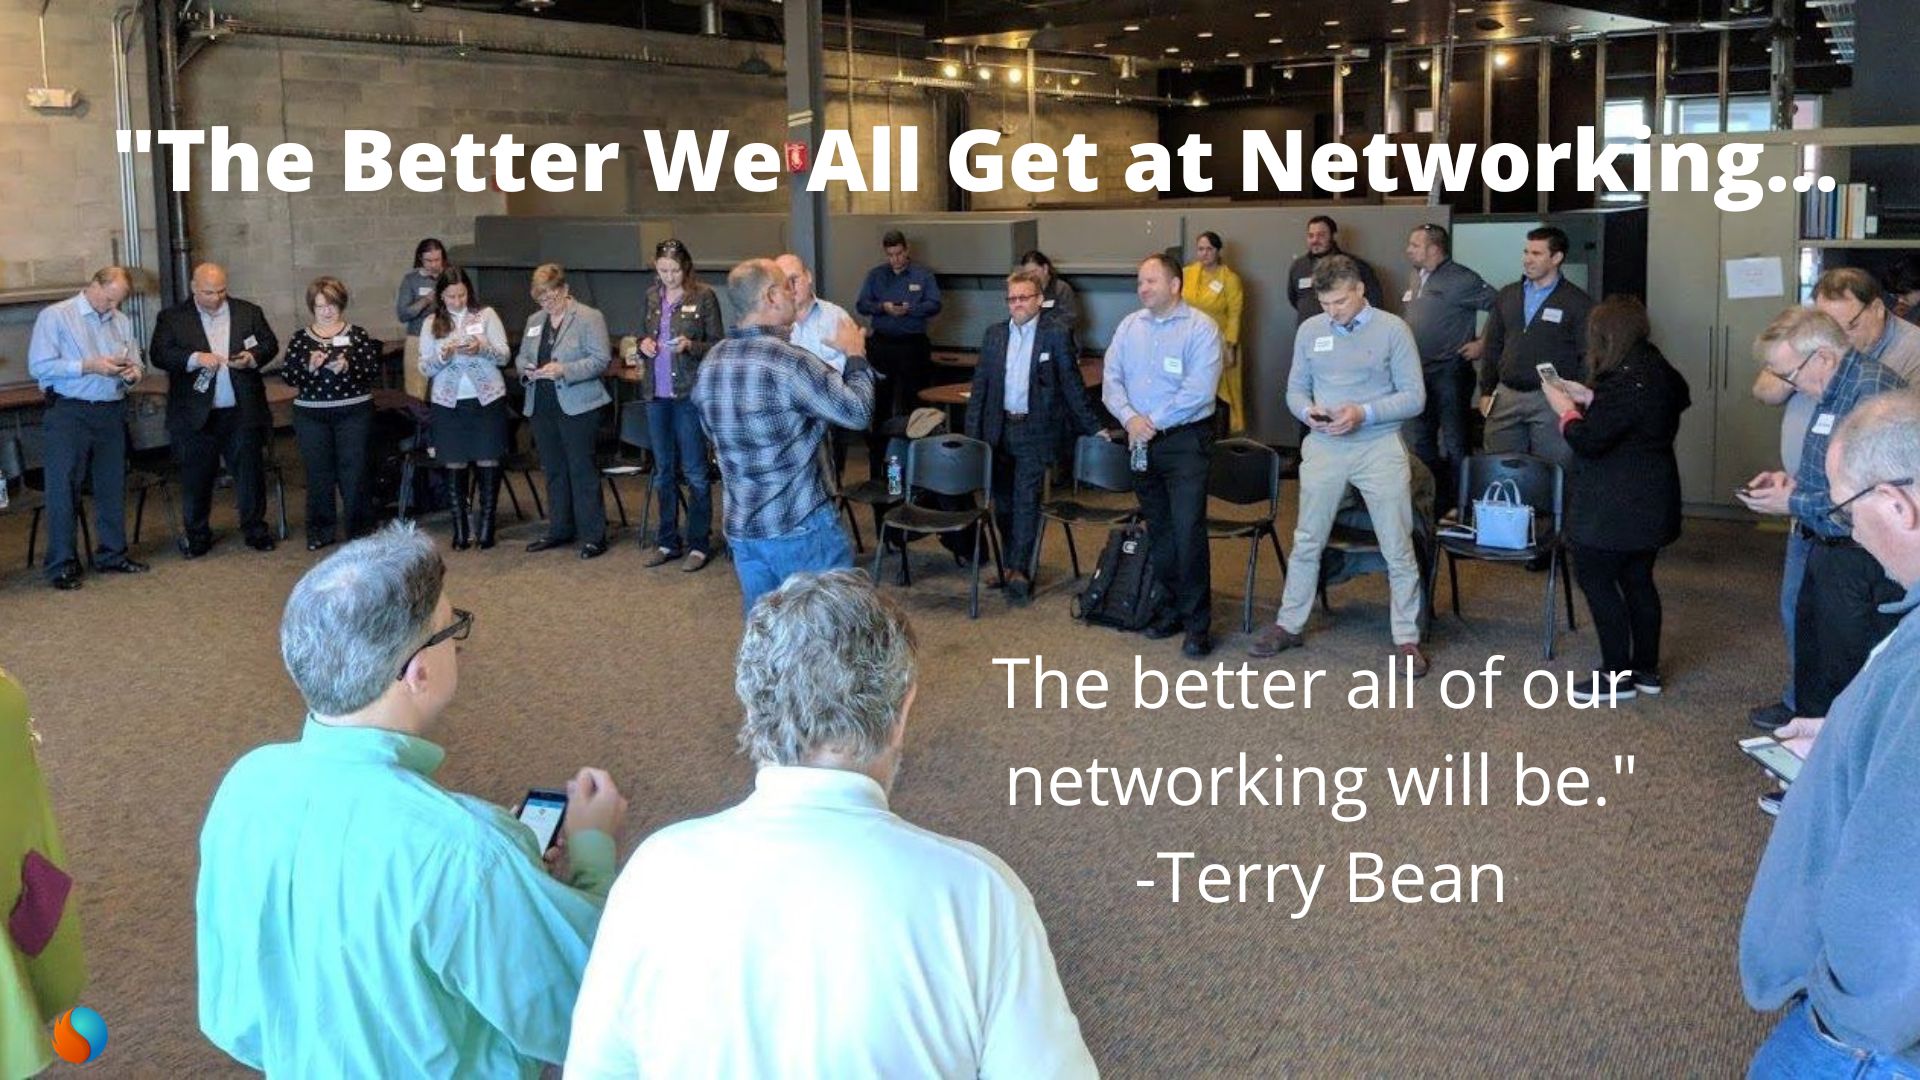 Let's get better at networking